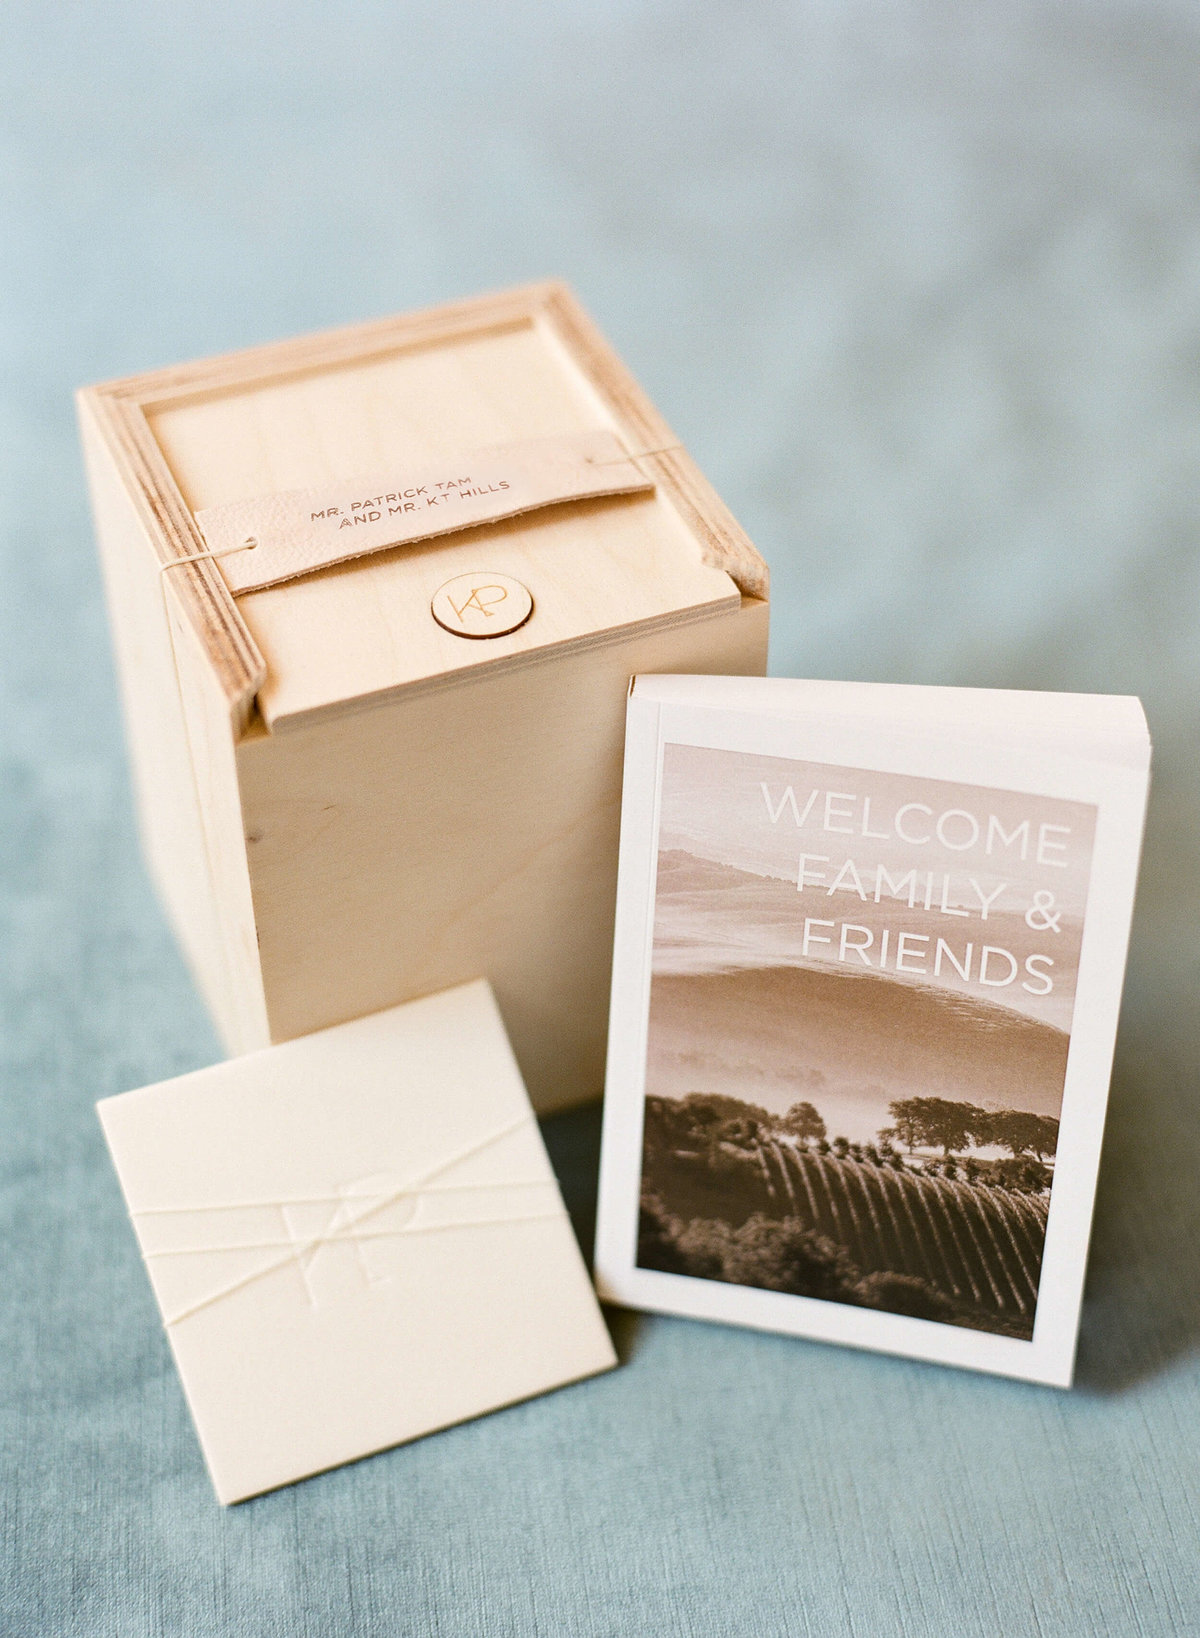 17-KTMerry-wedding-photography-welcome-box-NapaValley